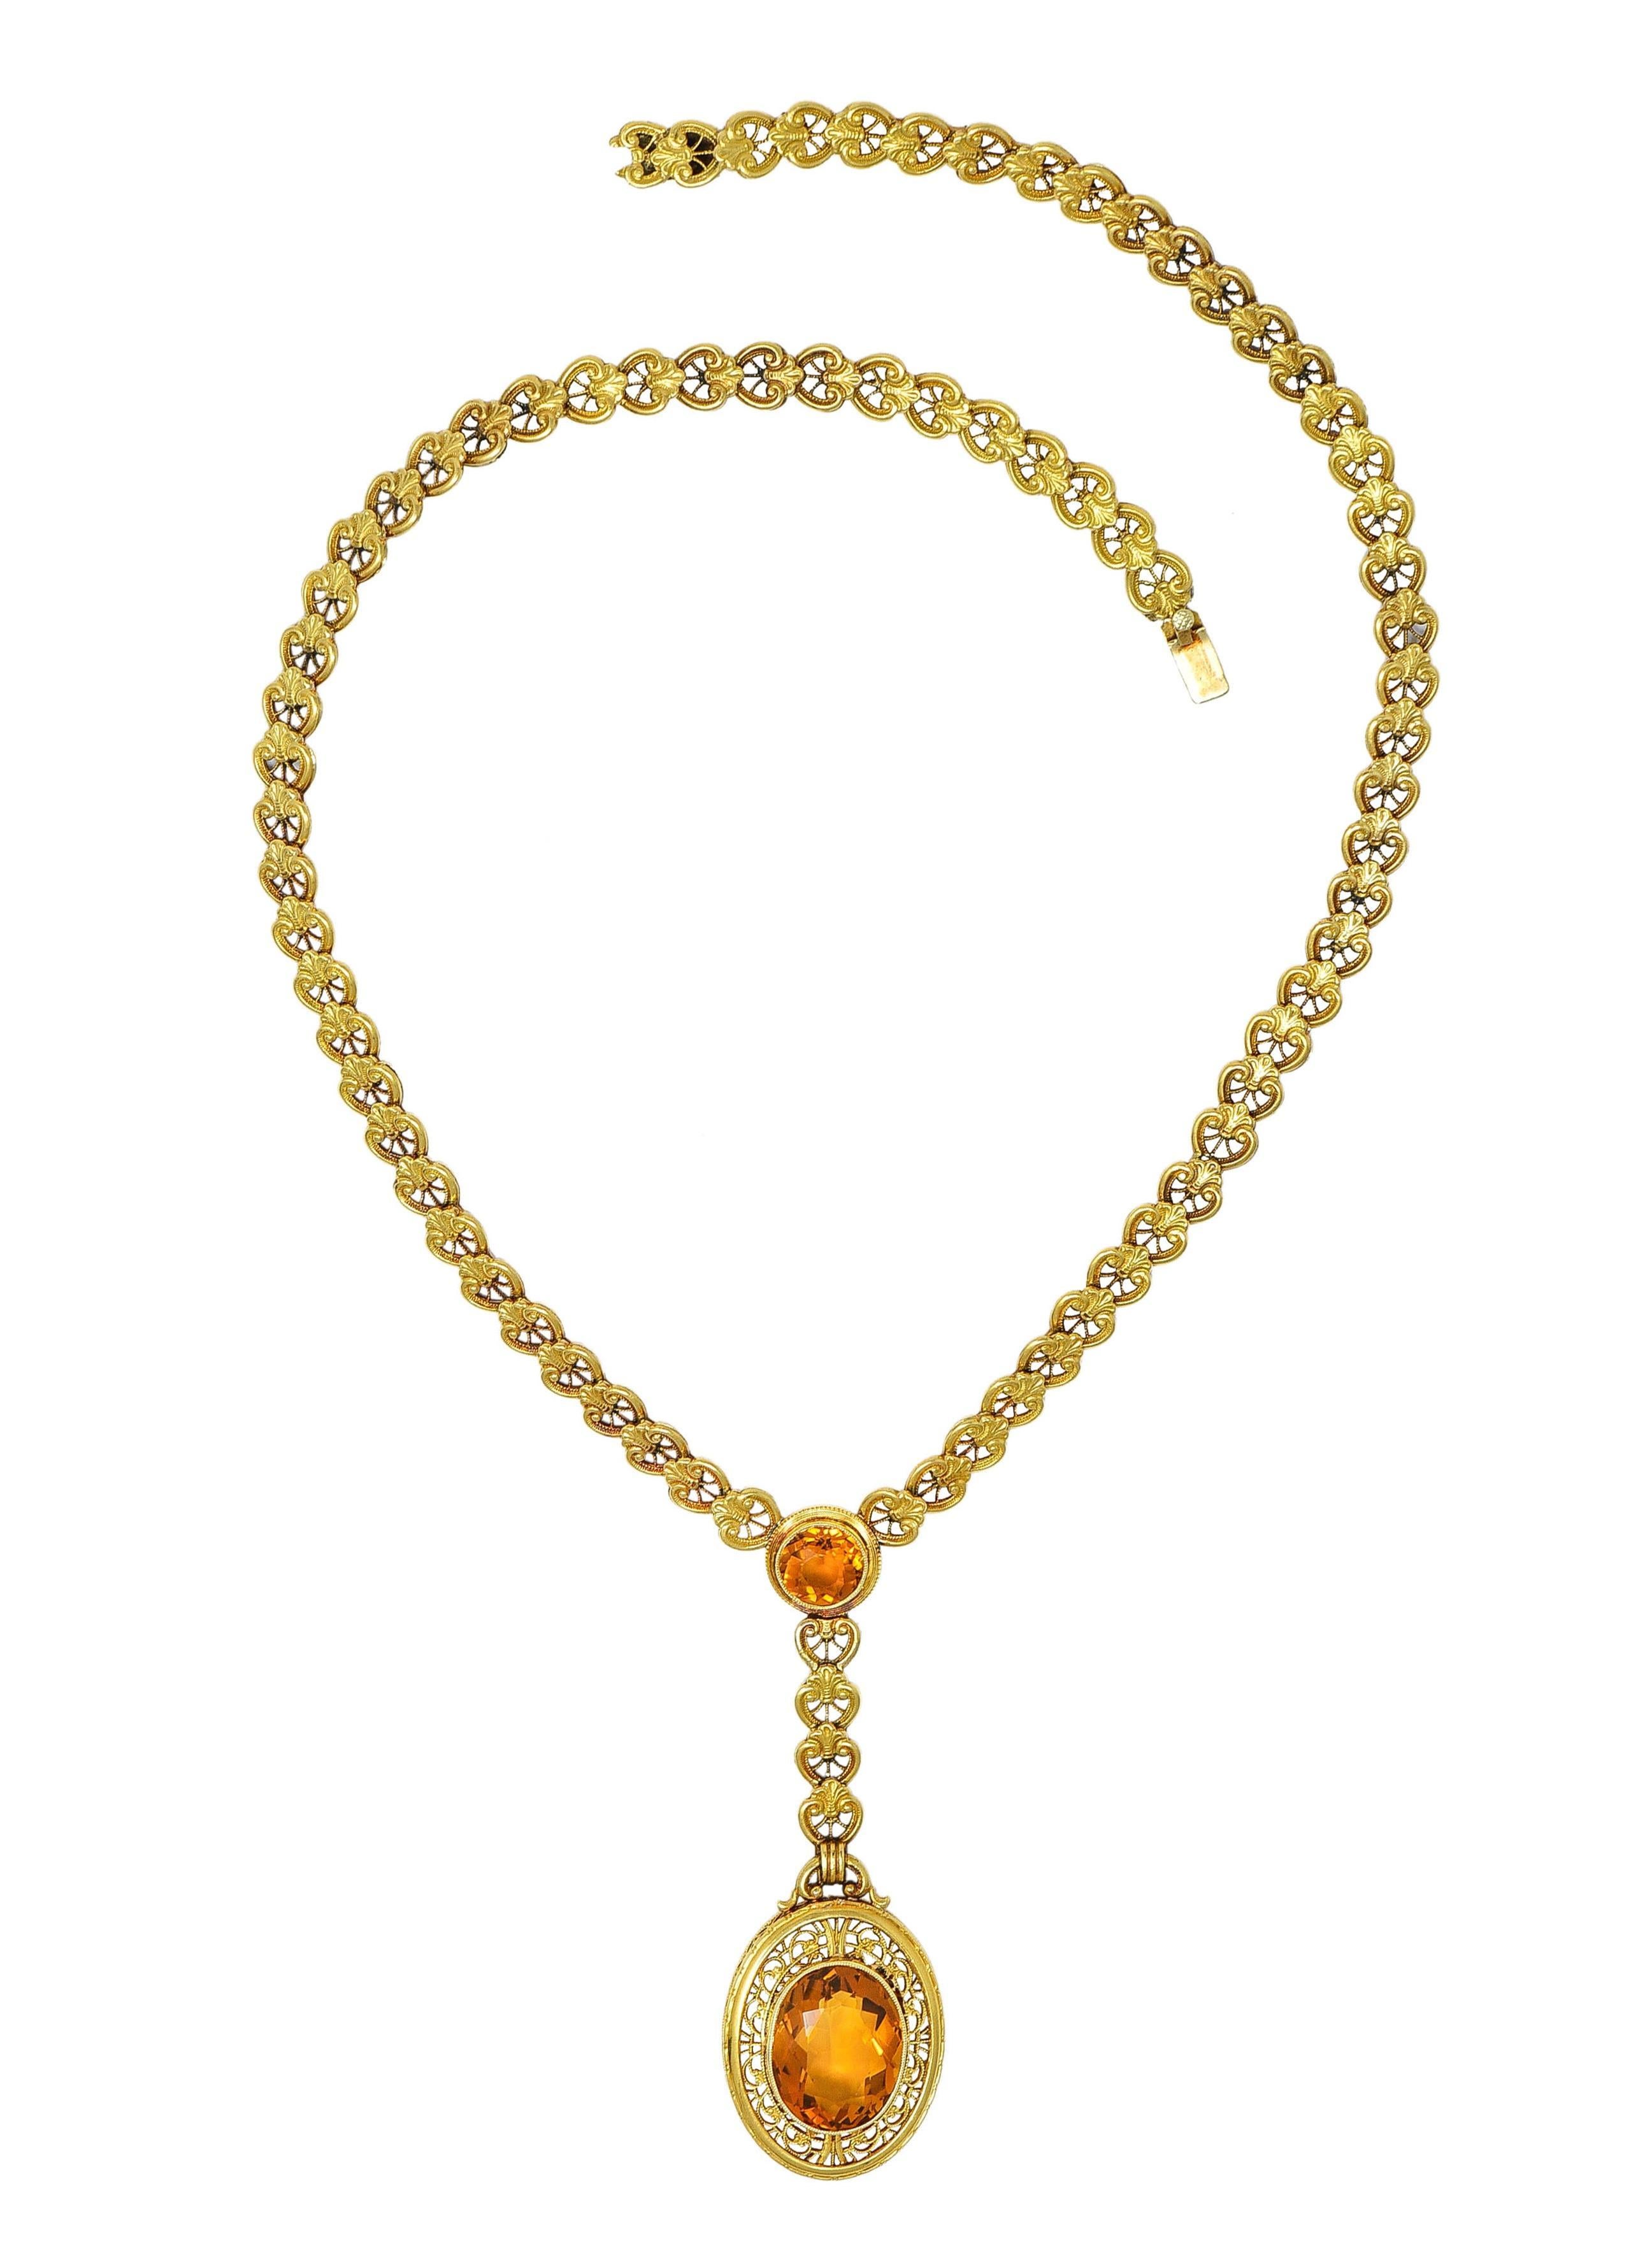 Comprised of hinged links designed as scrolling lotus motifs centering a citrine station 
Round cut and weighing approximately 1.57 carats total - set in a milgrain bezel 
Transparent medium orange - with disk surround suspending drop
Centering an